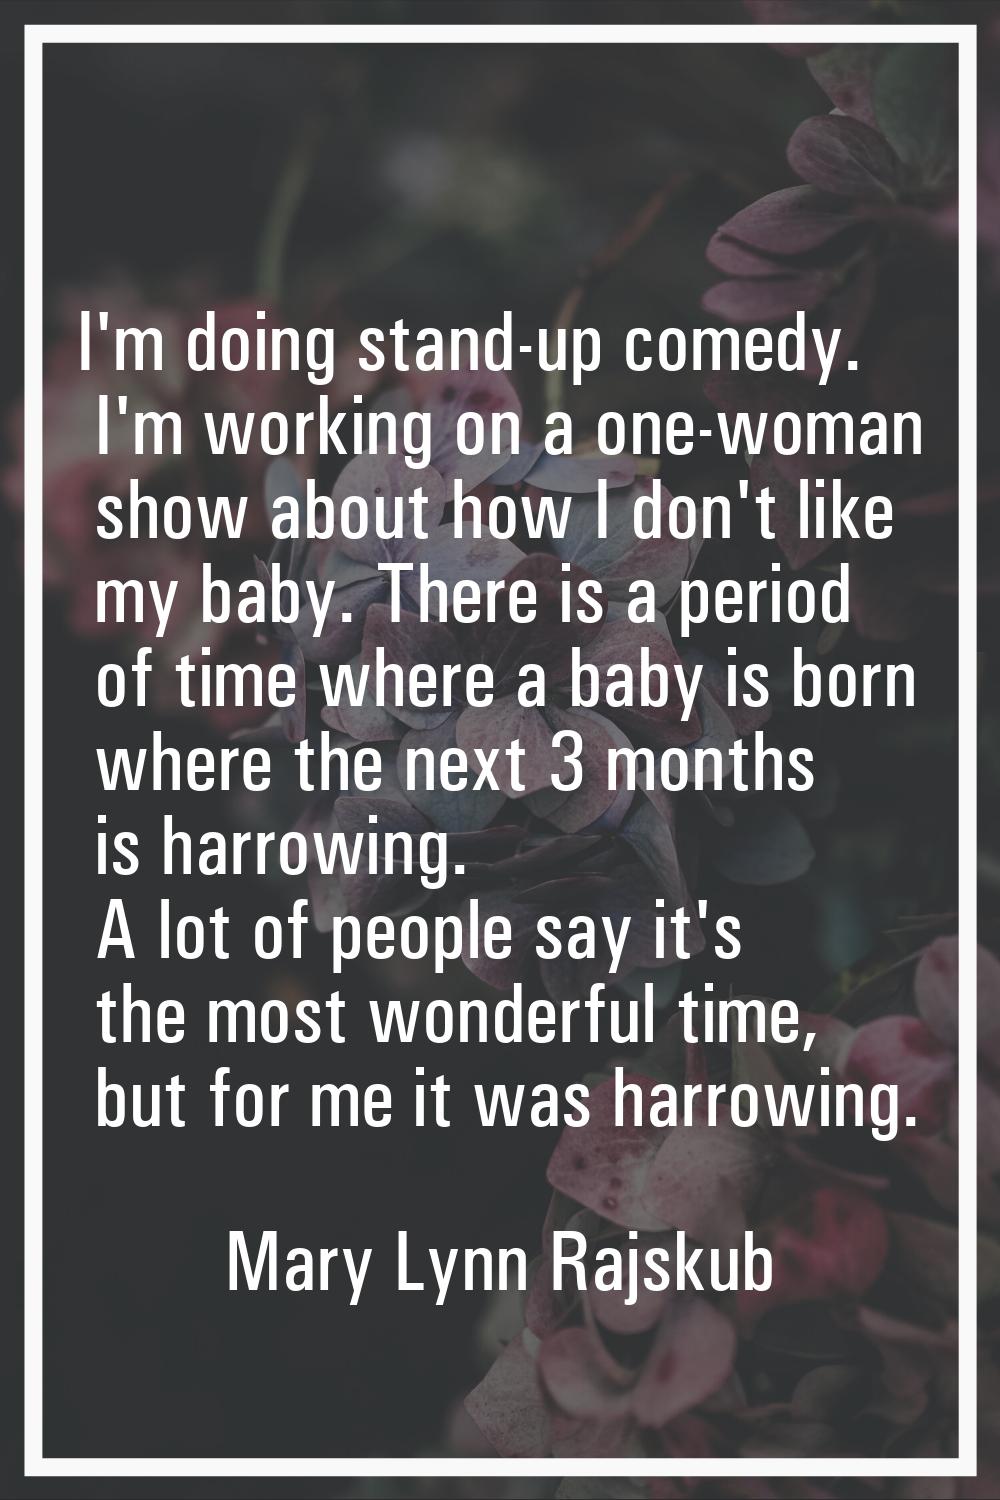 I'm doing stand-up comedy. I'm working on a one-woman show about how I don't like my baby. There is